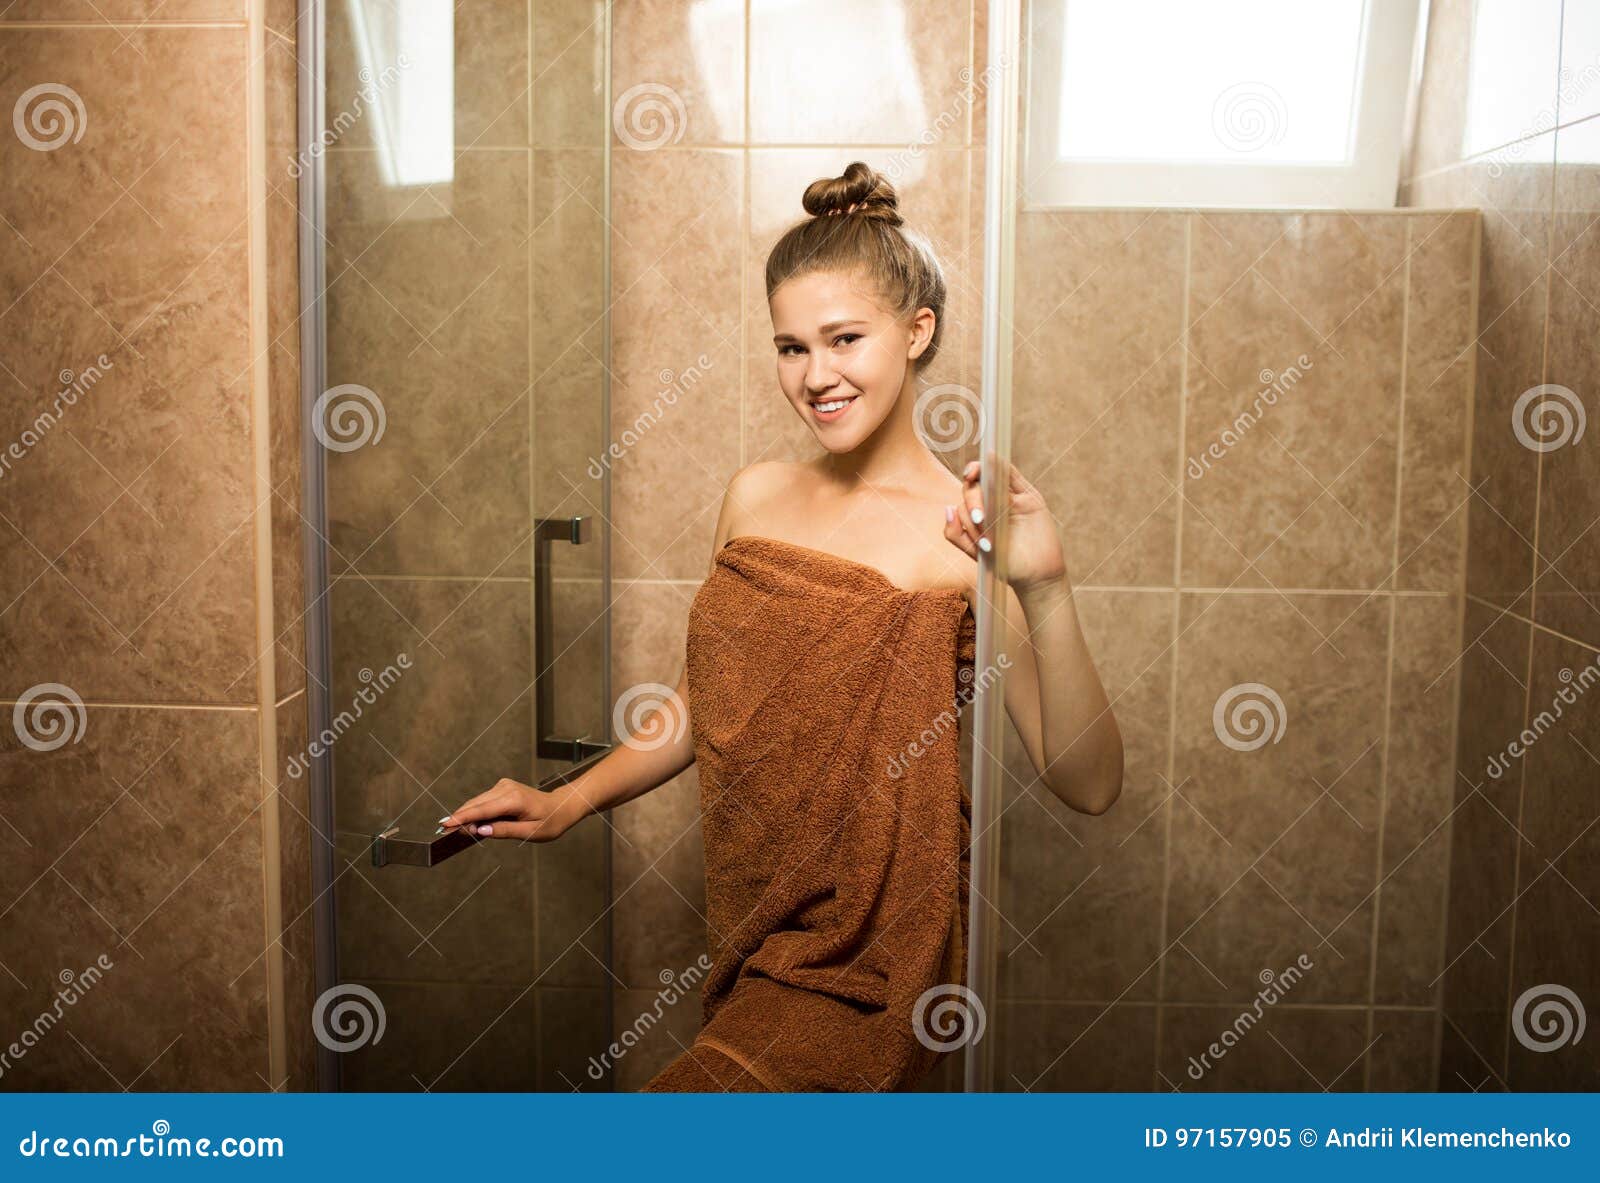 donald daly add photo teen daughter in shower